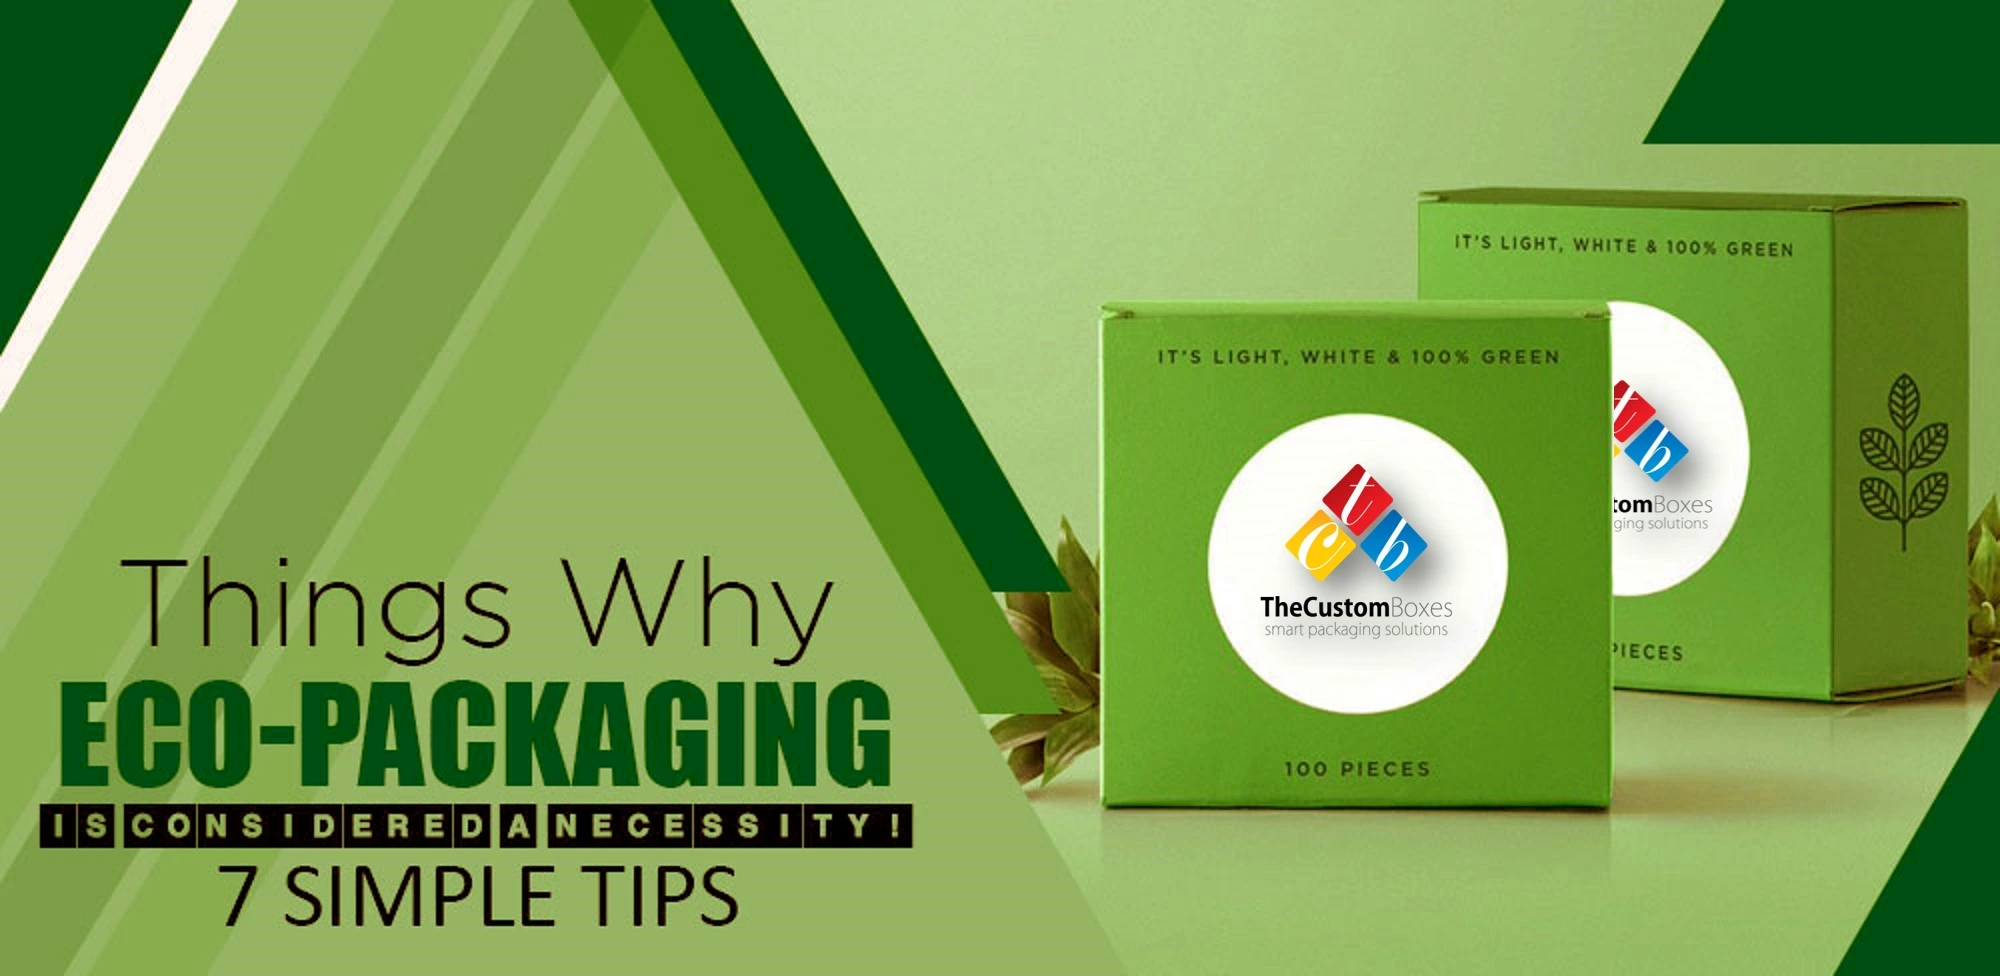 Things Why Eco-packaging Is Considered A Necessity! 7 Simple Tips